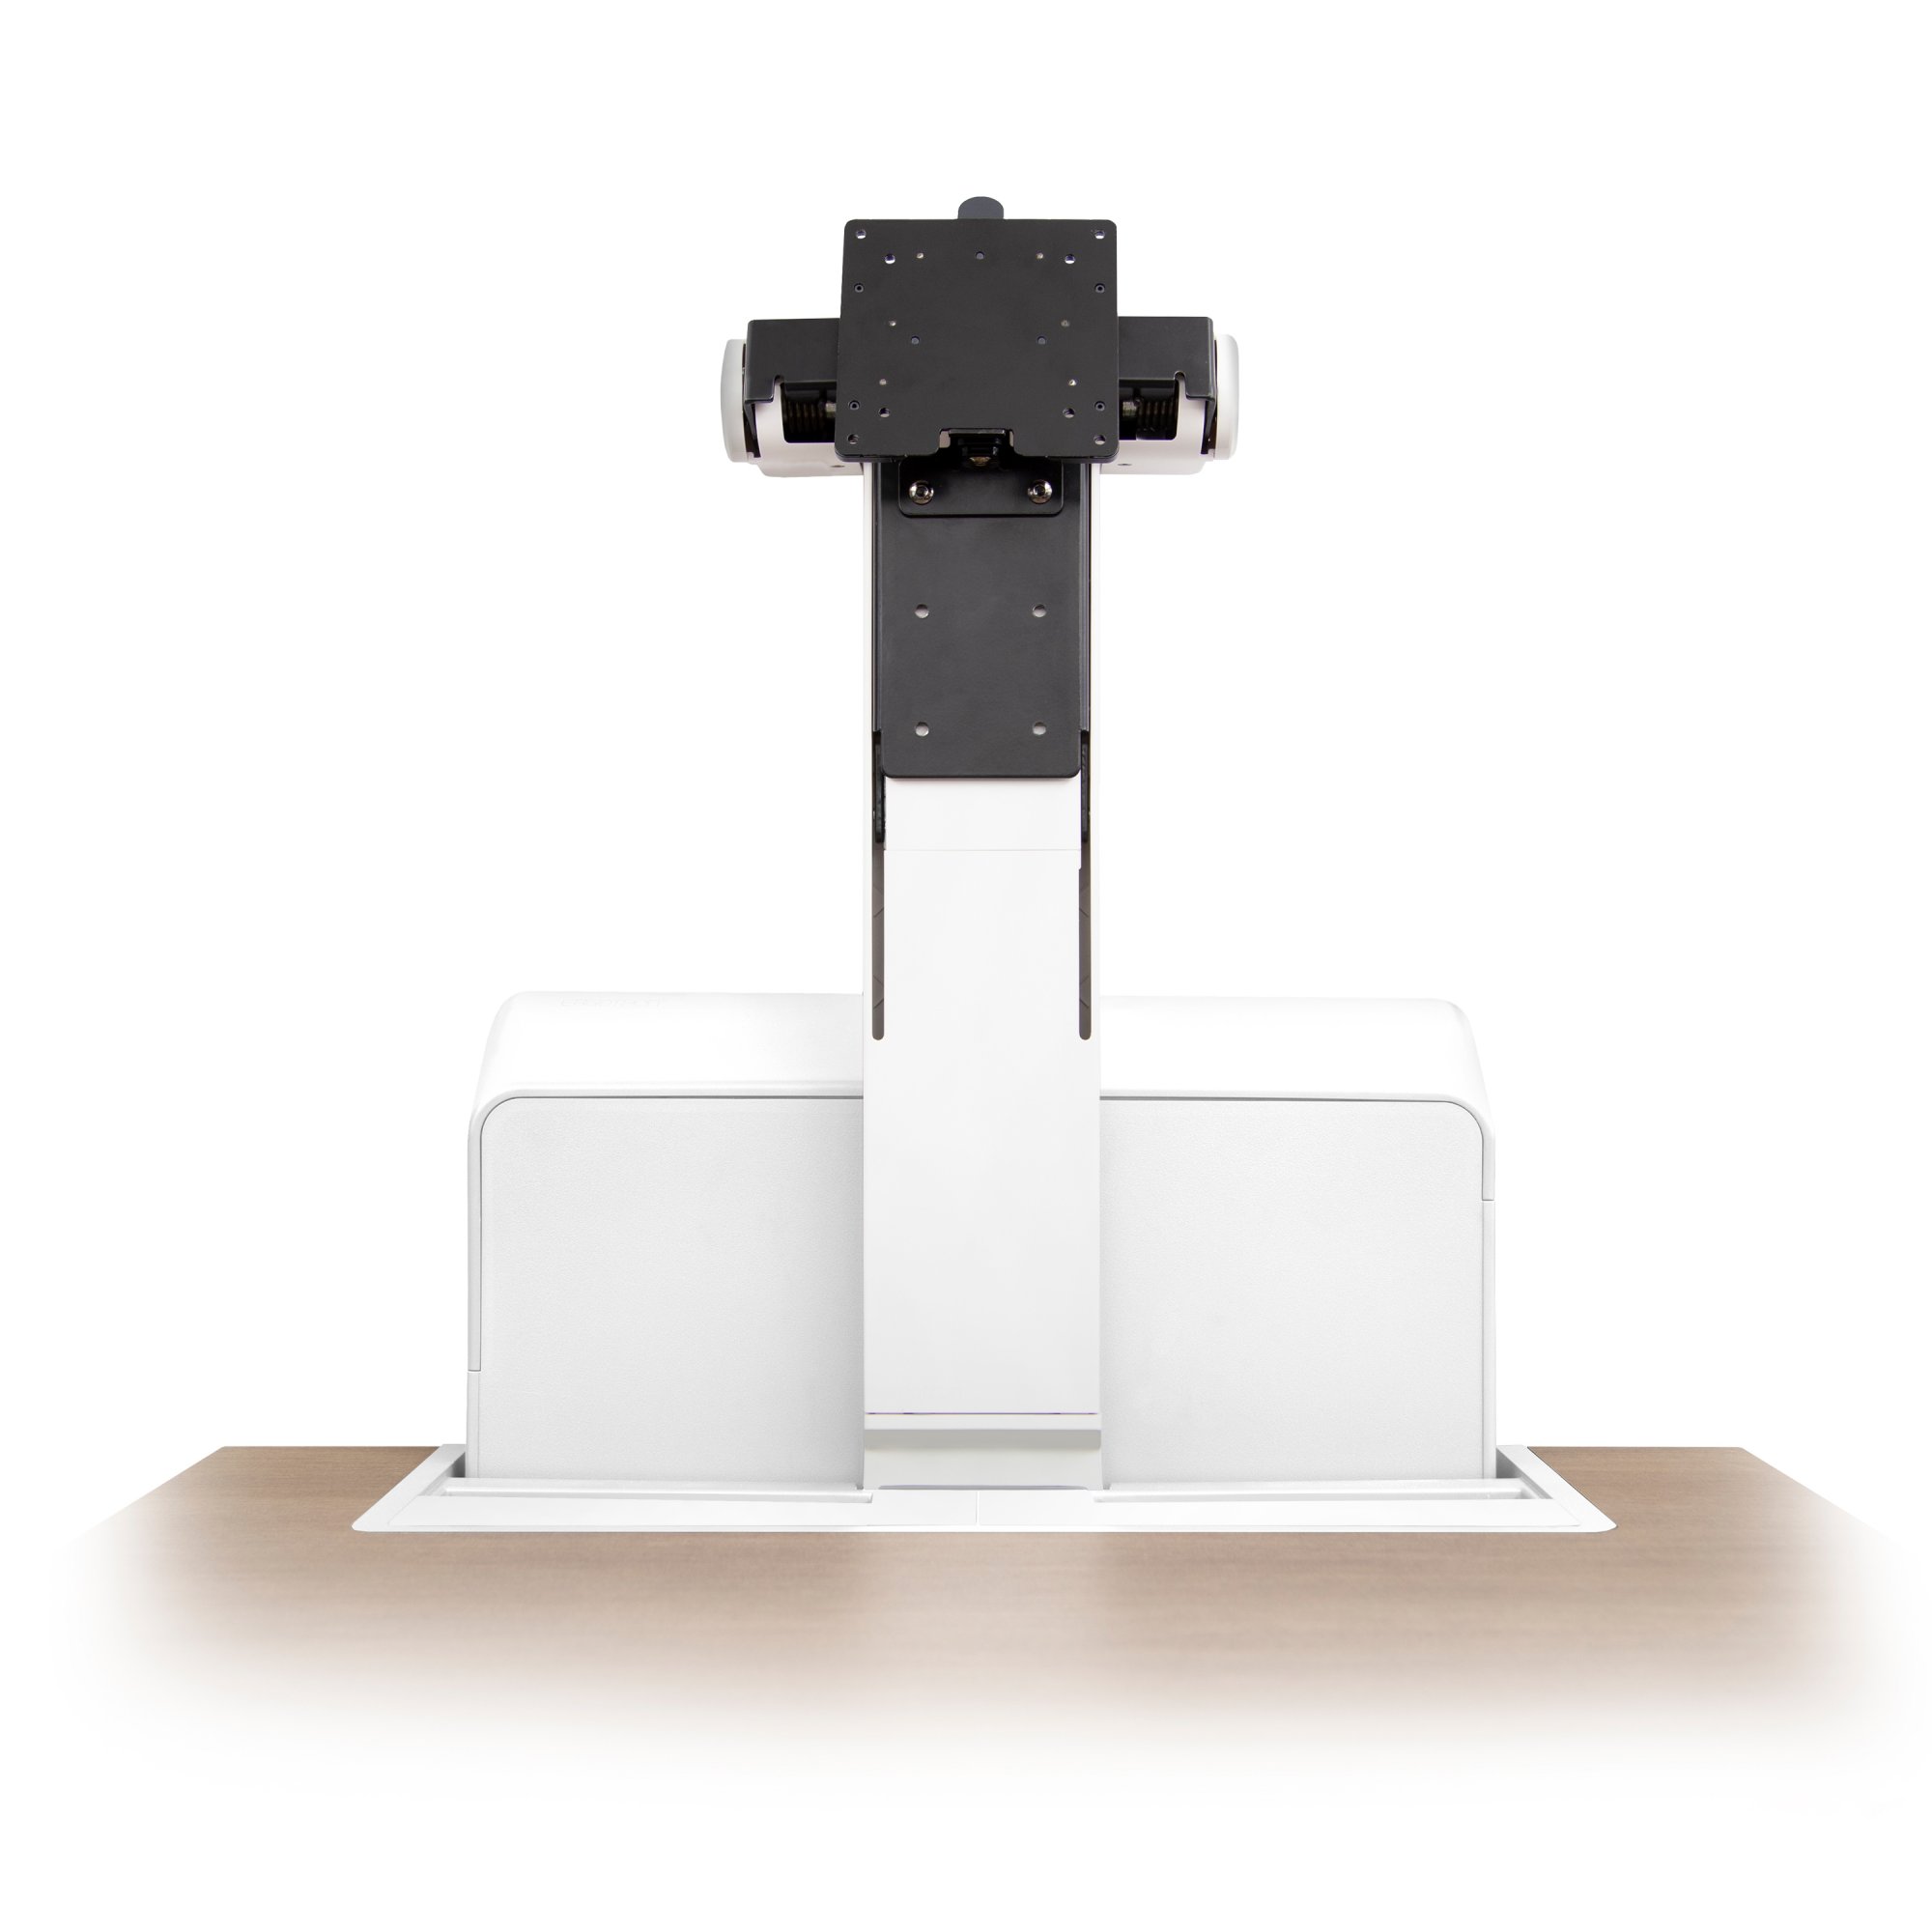 This monitor kit offers 5" (13 cm) of additional height adjustment for a personalized fit.